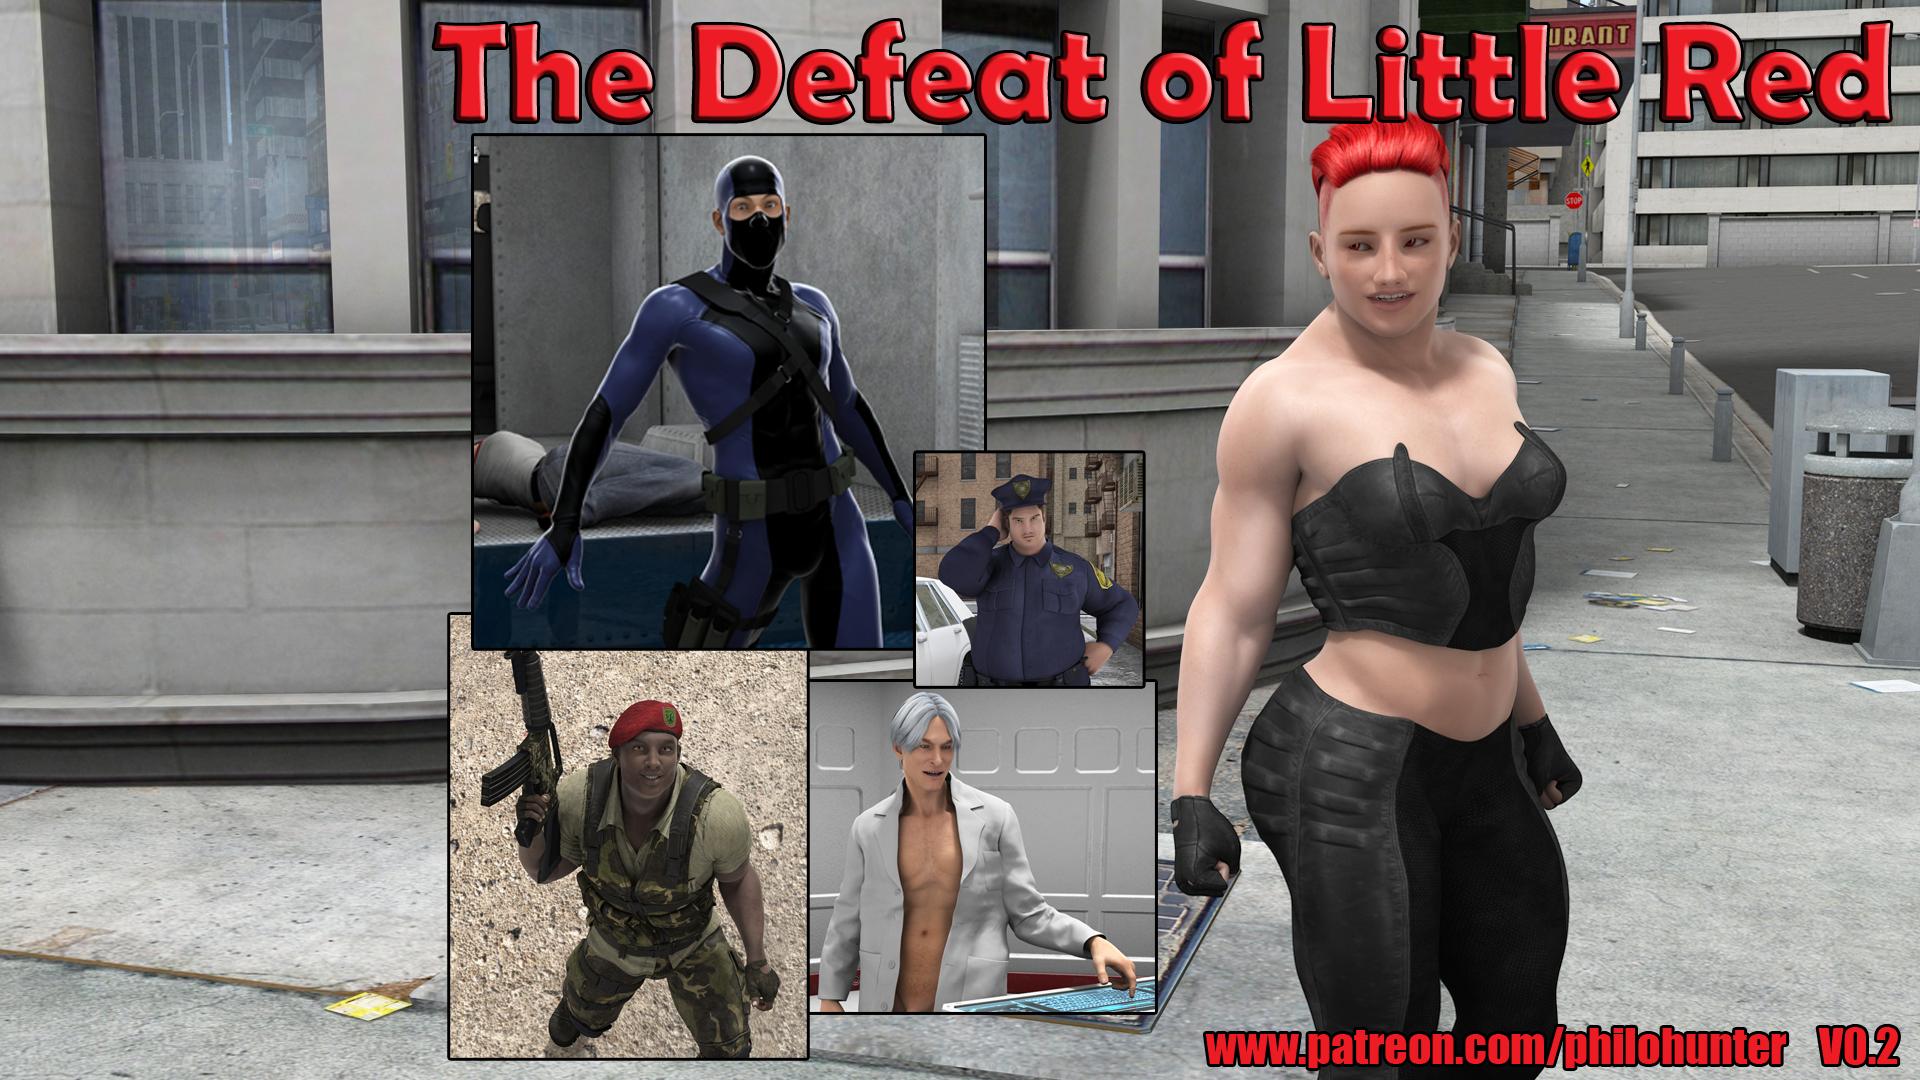 PHILO HUNTER - THE DEFEAT OF LITTLE RED  VERSION 0.3